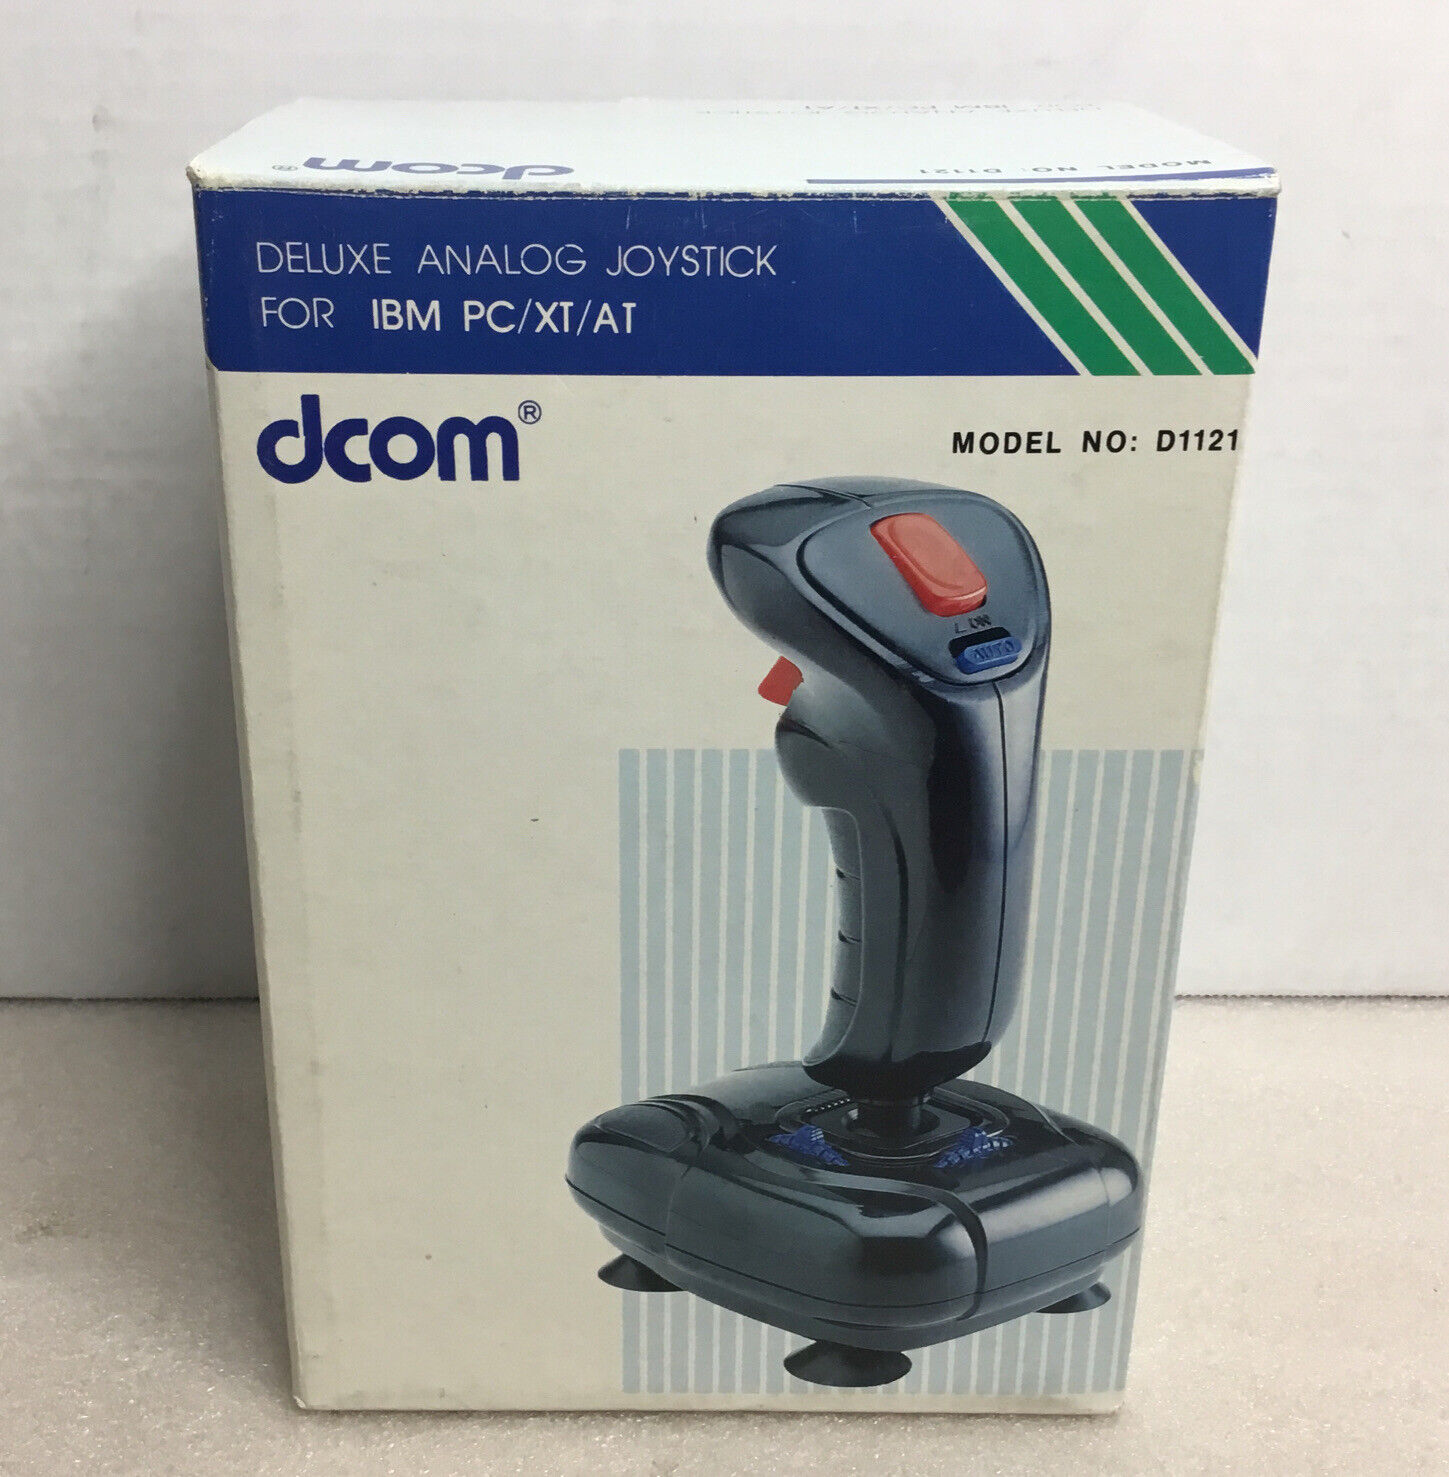 Vintage dcom Deluxe Analog Joystick for IBM PC XT AT D1121 In Box